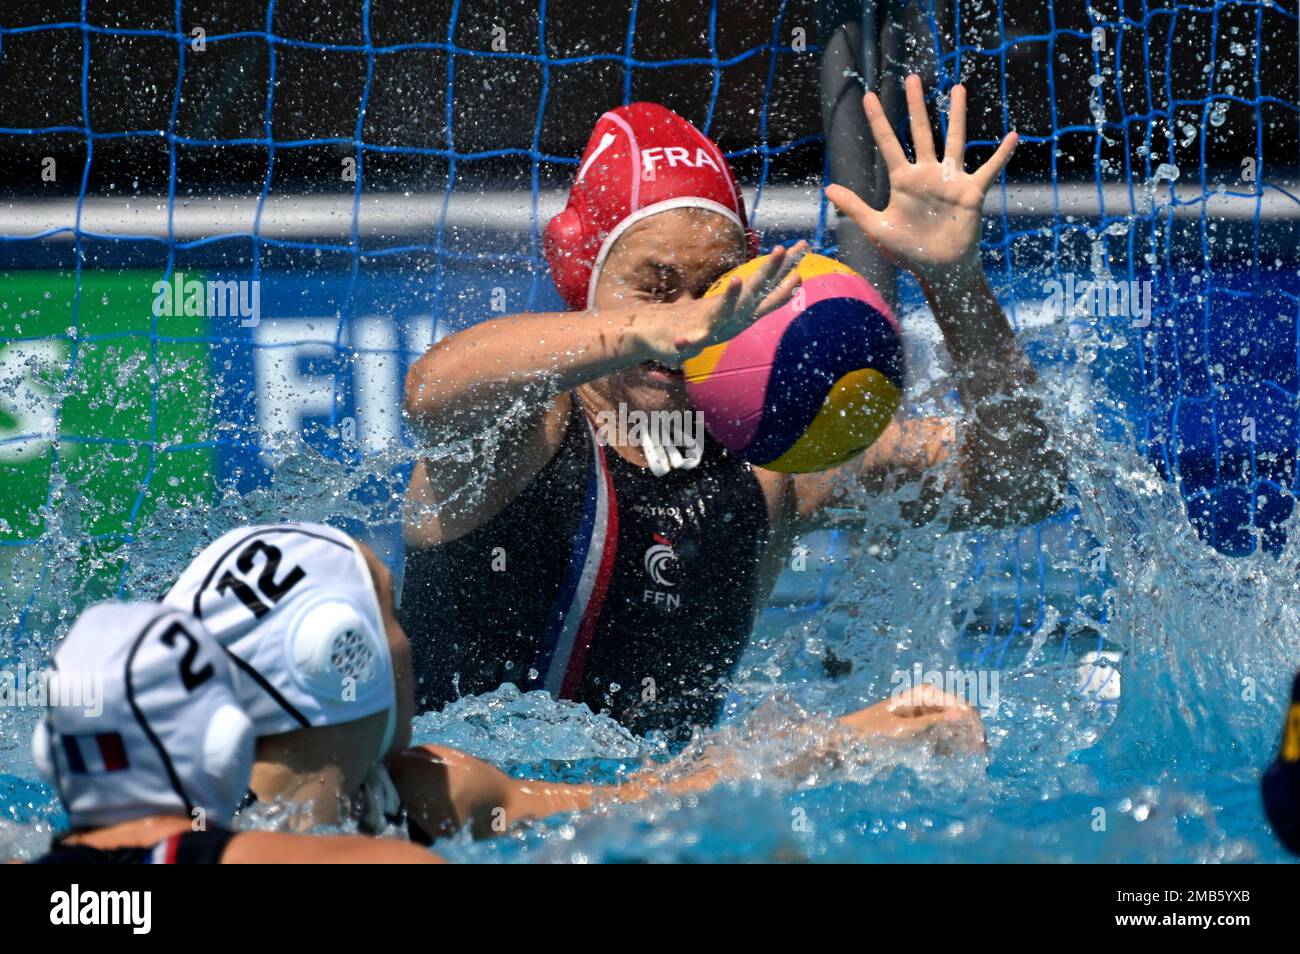 Chloe Vidal of France in action during the Women's water polo  classification match between France and Spain at the 19th FINA World  Championships in Budapest, Hungary, Thursday, June 30, 2022. (AP Photo/Anna